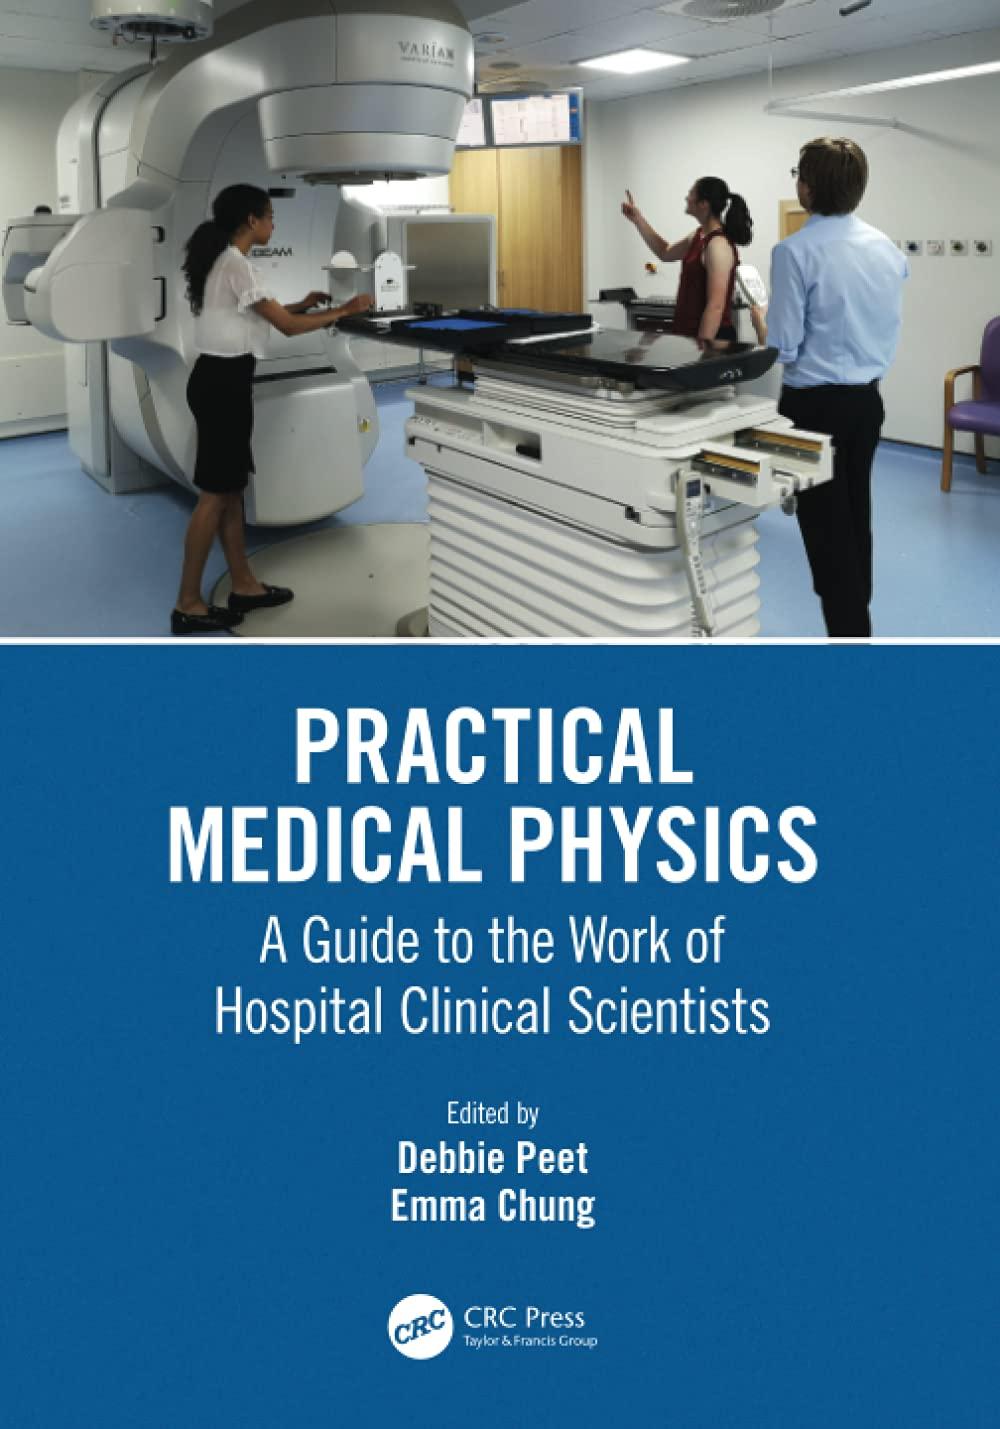 practical medical physics a guide to the work of hospital clinical scientists 1st edition debbie peet, emma